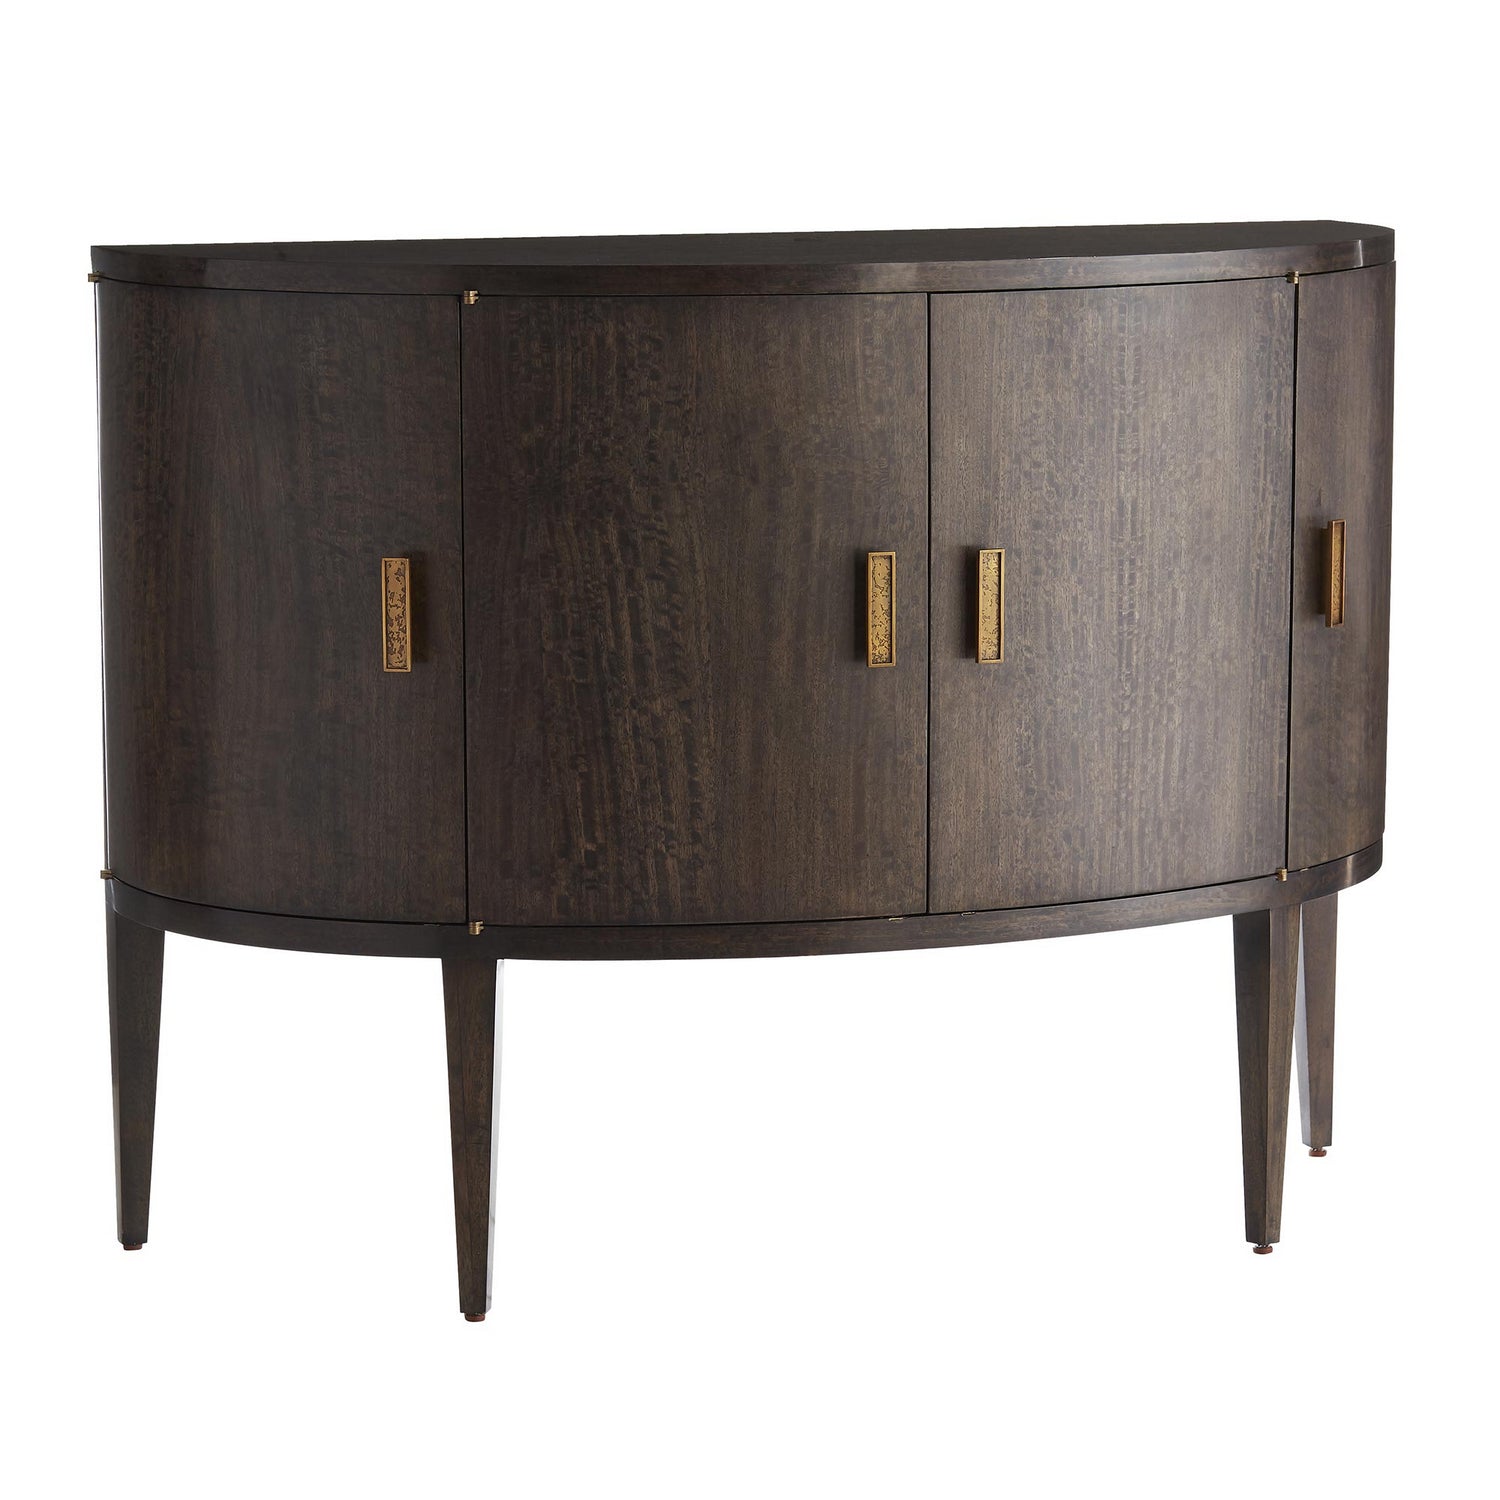 Console from the Leilani collection in Brindle finish